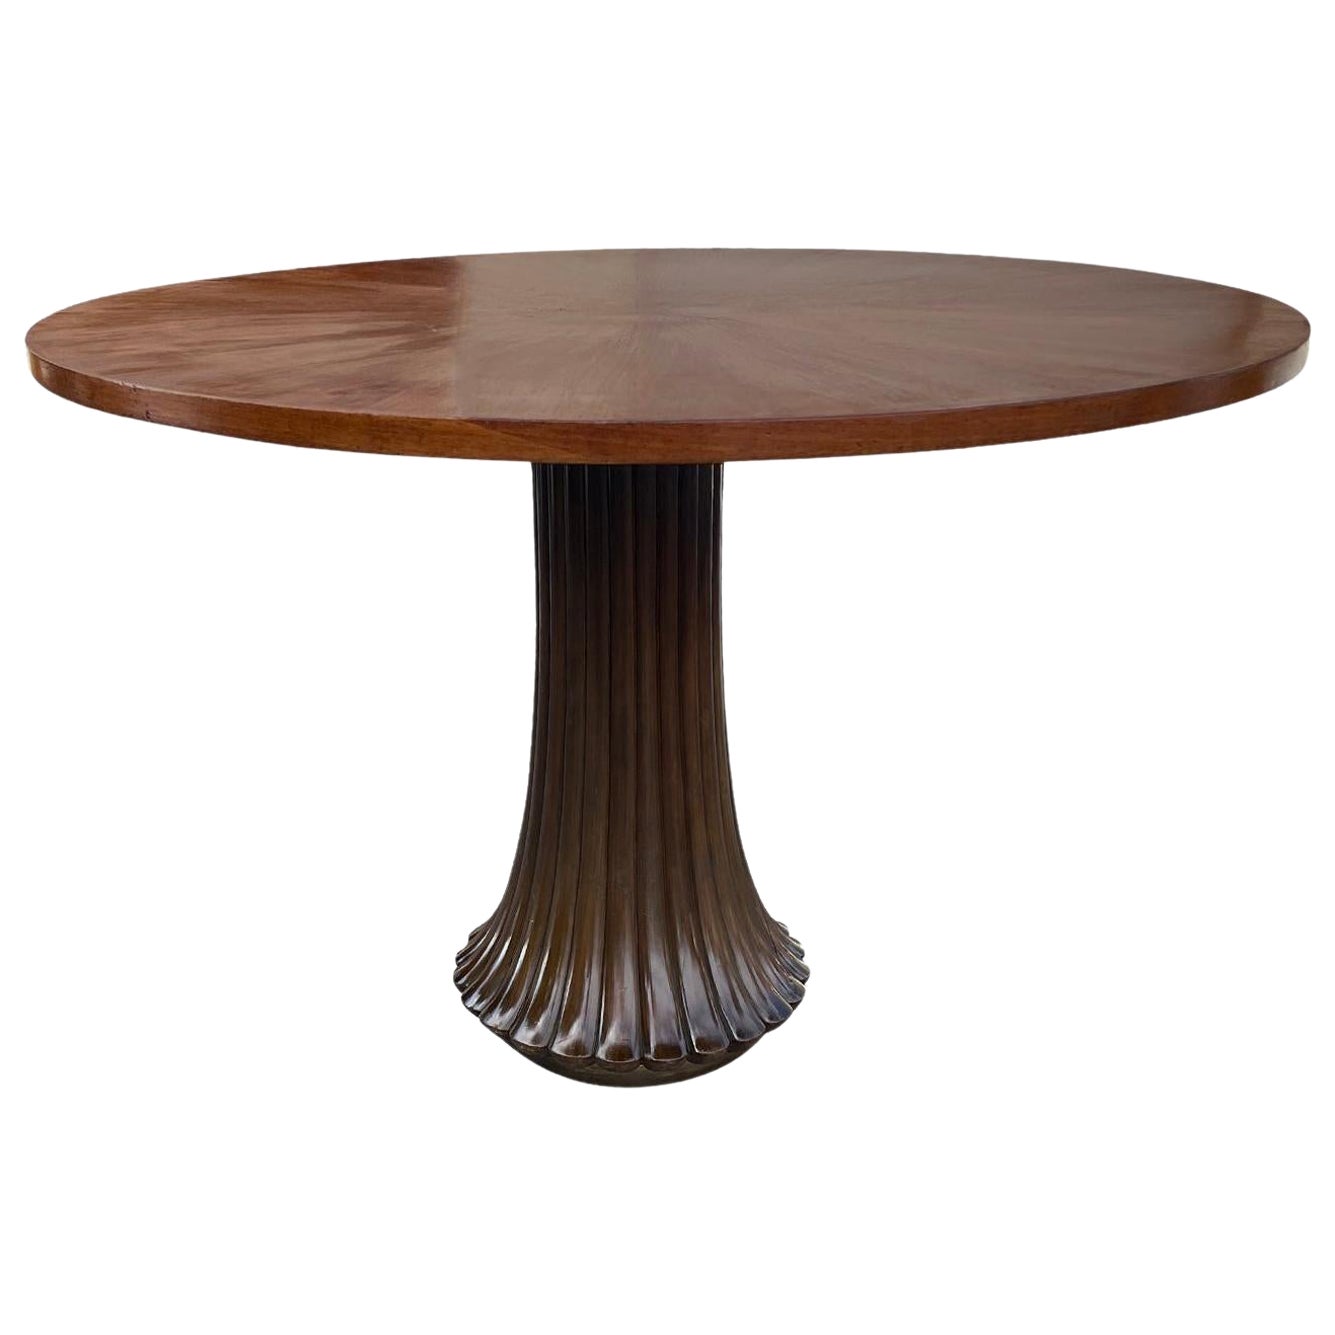 20th Century Italian Round Vintage Rosewood, Walnut Dining Room Table For Sale